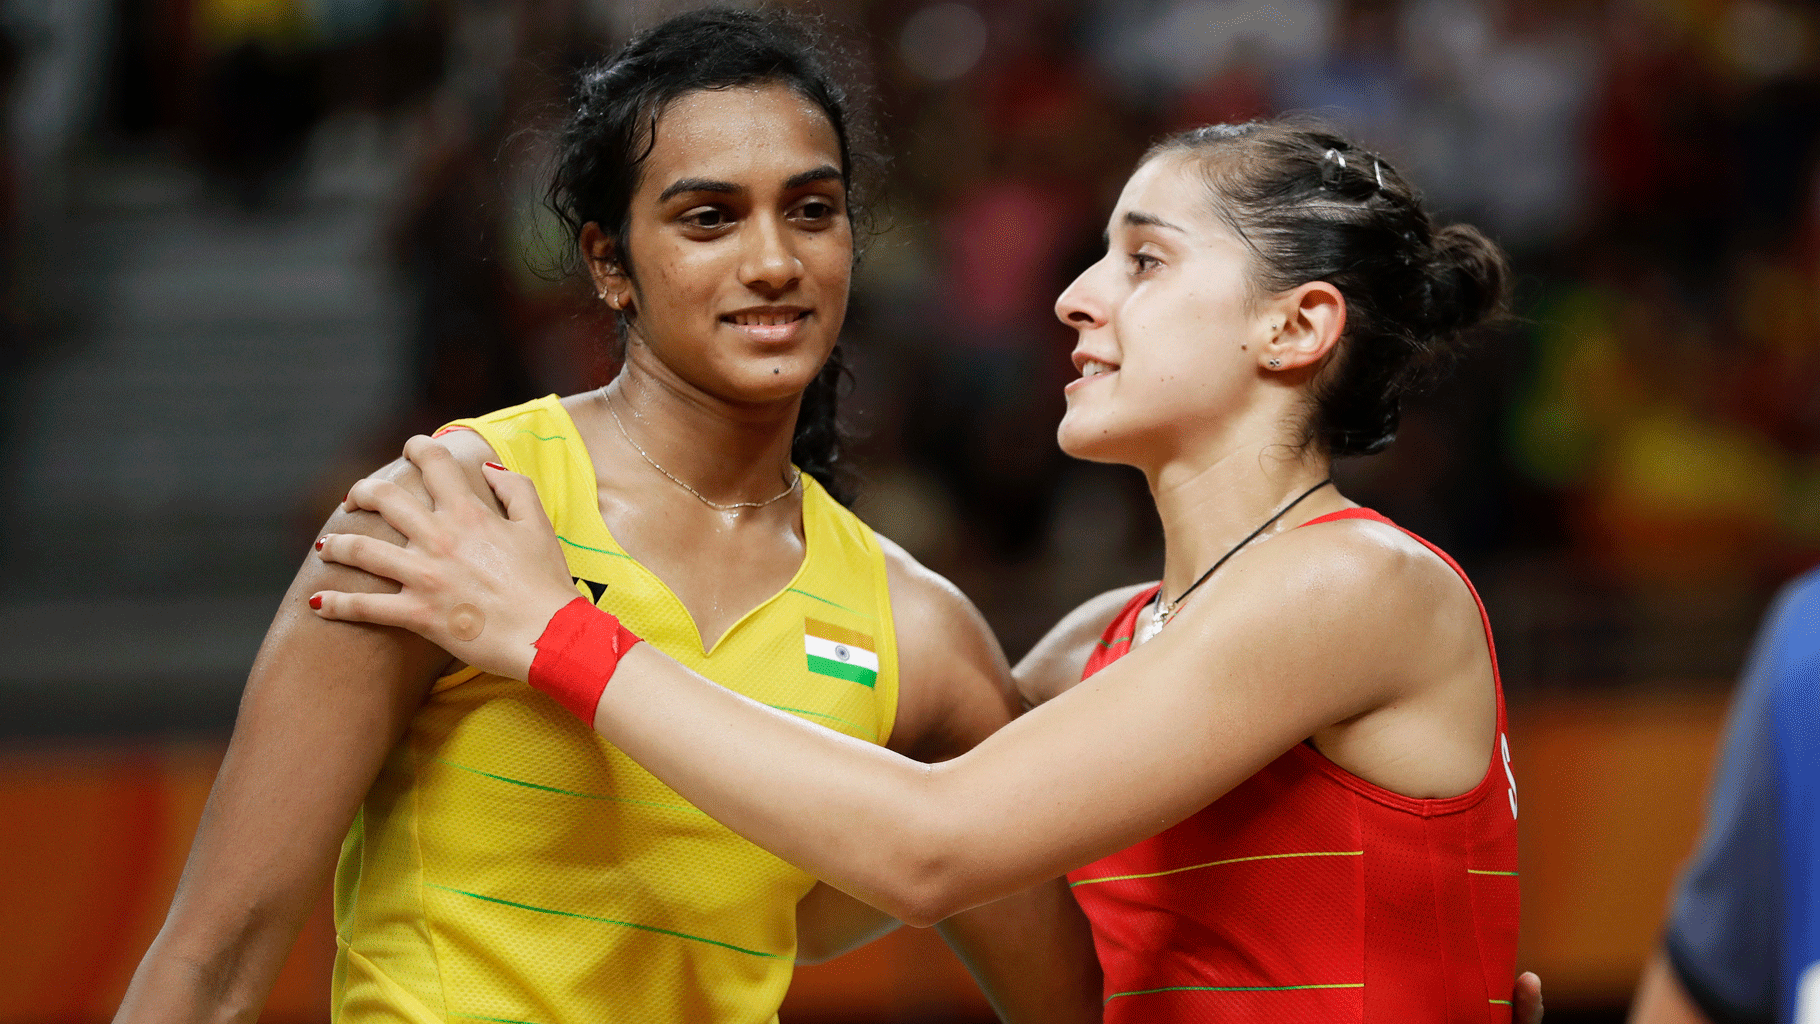  PV Sindhu and Carolina Marin will be facing-off in the finals of the World Badminton Championships on Sunday.